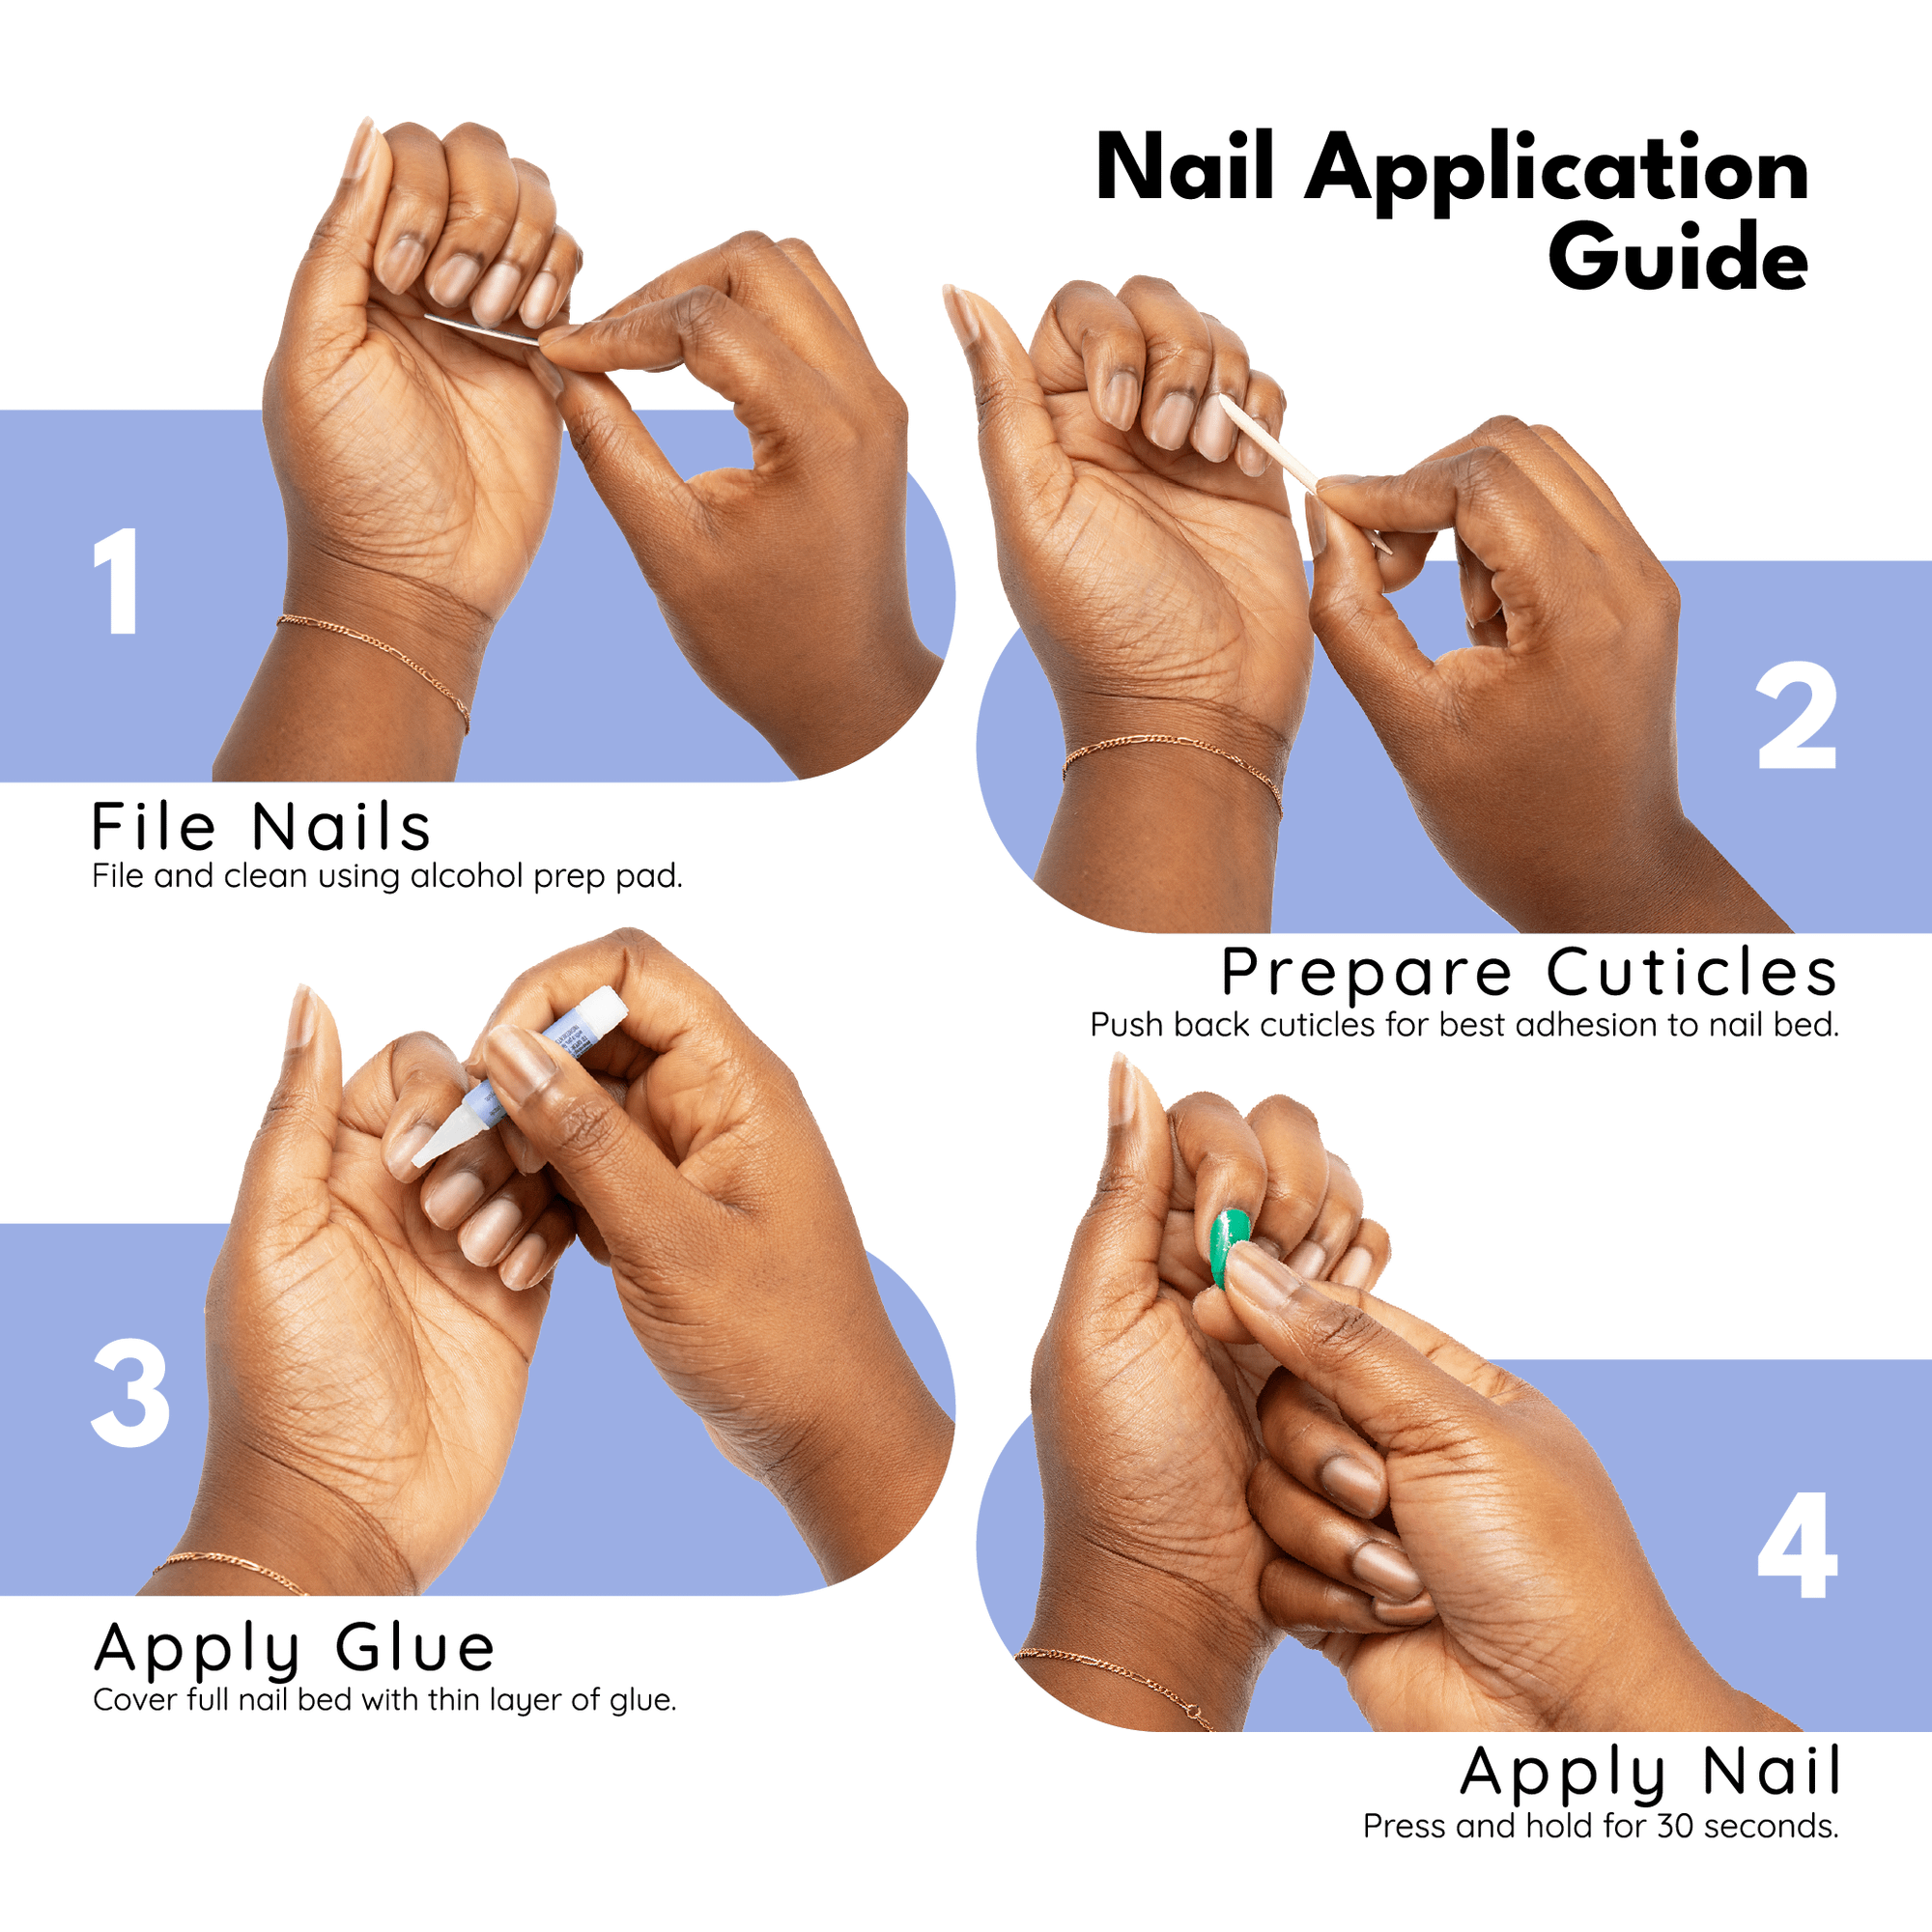 Just BeCause press on fake nails application instructions. !. File nails and clean using alcohol prep pad. 2. Prepare cuticles, push back cuticles for best adhesion to nail bed. 3. Apply Glue, cover ful nail bed with thin layer of glue. 4. Apply nail, press and hold for 30 seconds		